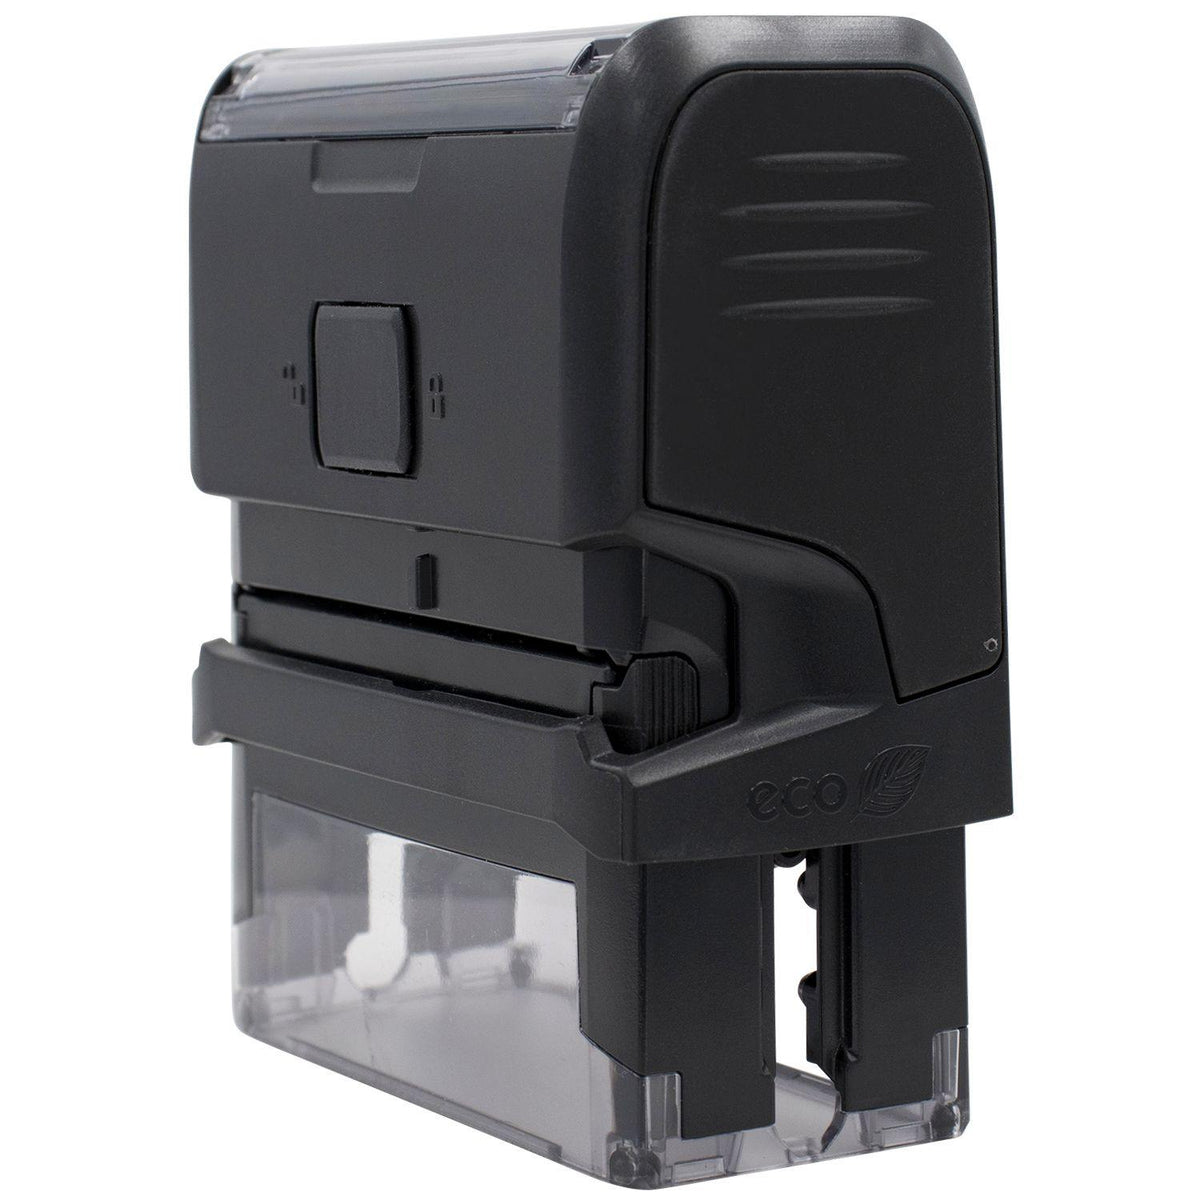 Large Self-Inking Outline Personal Stamp - Engineer Seal Stamps - Brand_Trodat, Impression Size_Large, Stamp Type_Self-Inking Stamp, Type of Use_Business, Type of Use_General, Type of Use_Office